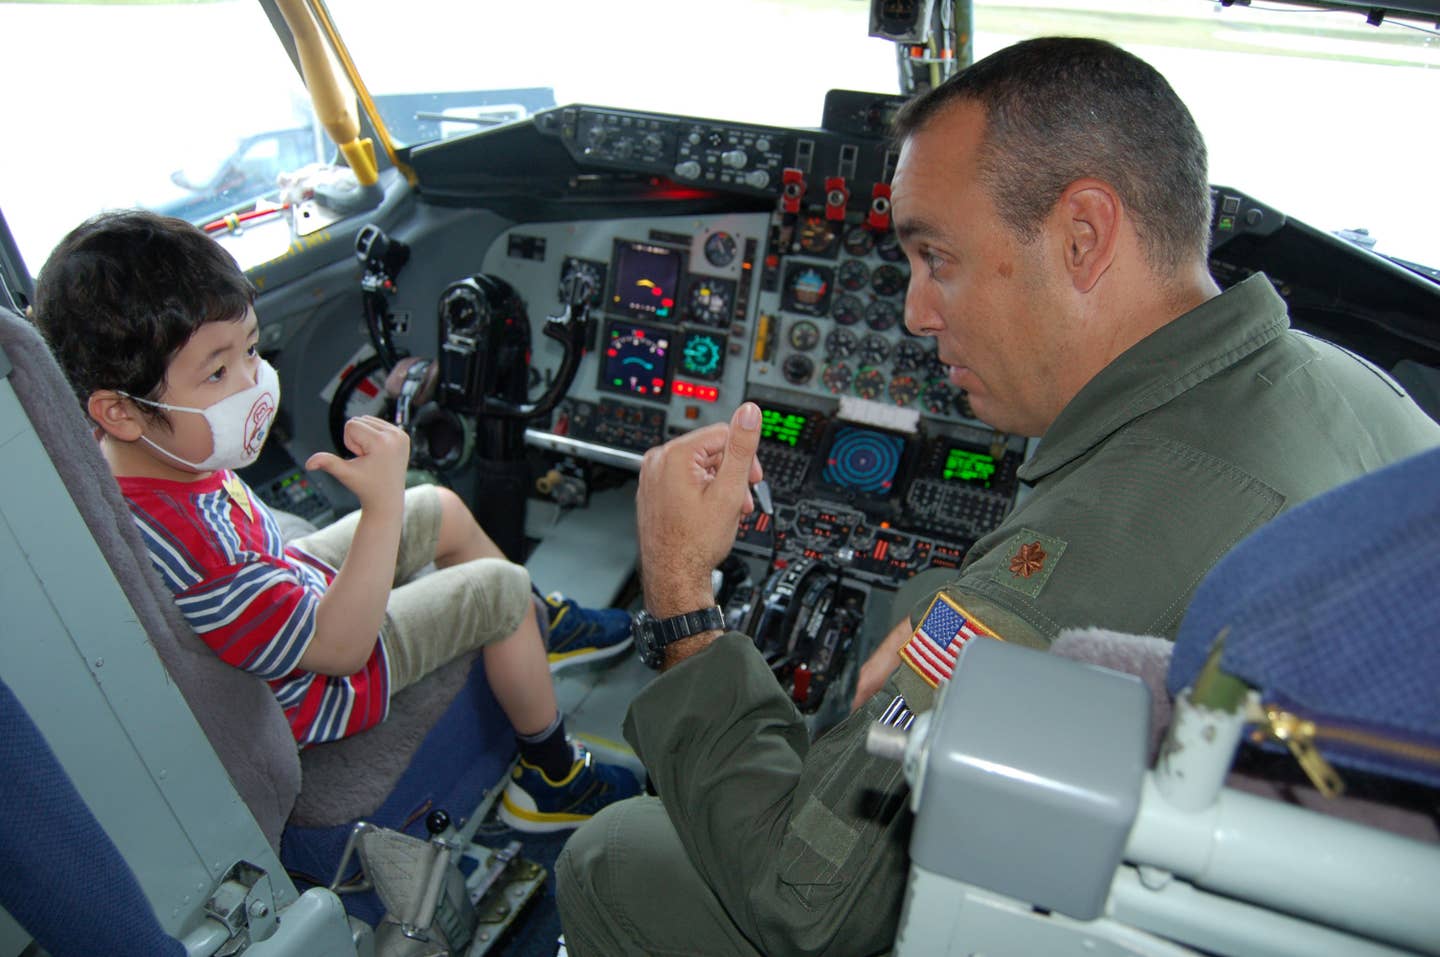 How an Air Force veteran started the Make-A-Wish Foundation